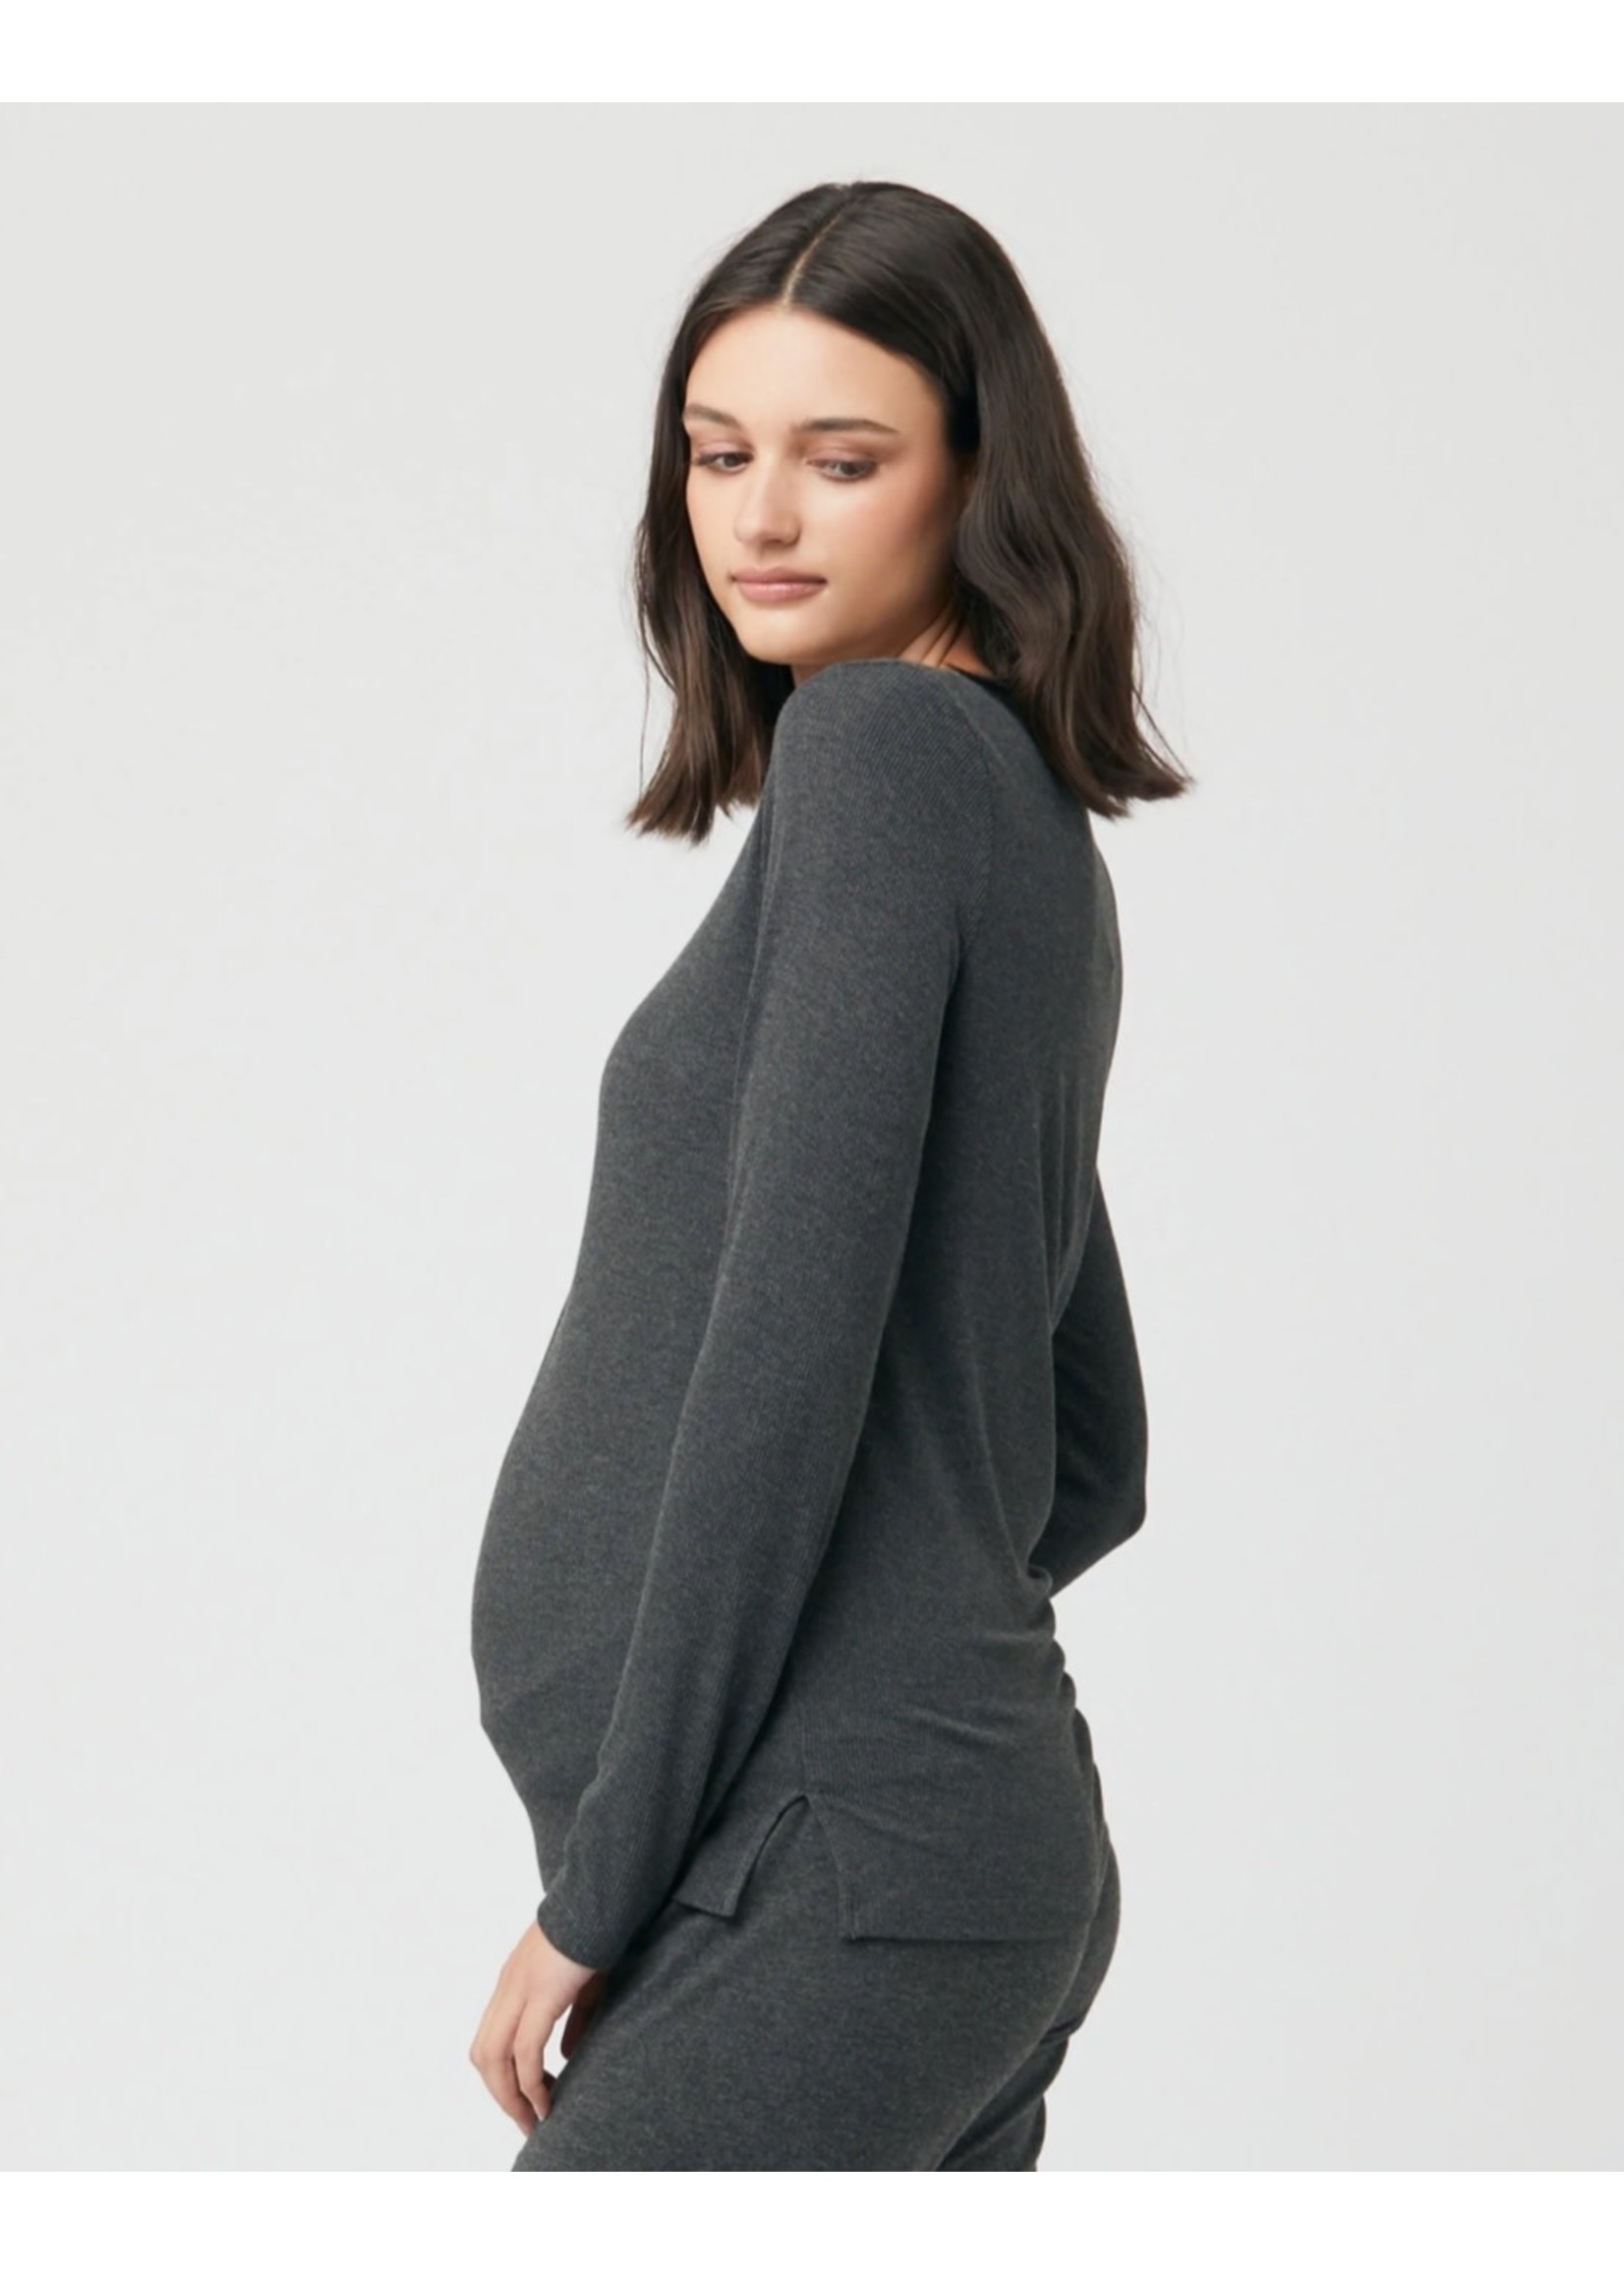 Ripe Maternity Ripe Maternity, Rib Button Through Top in Charcoal Marle